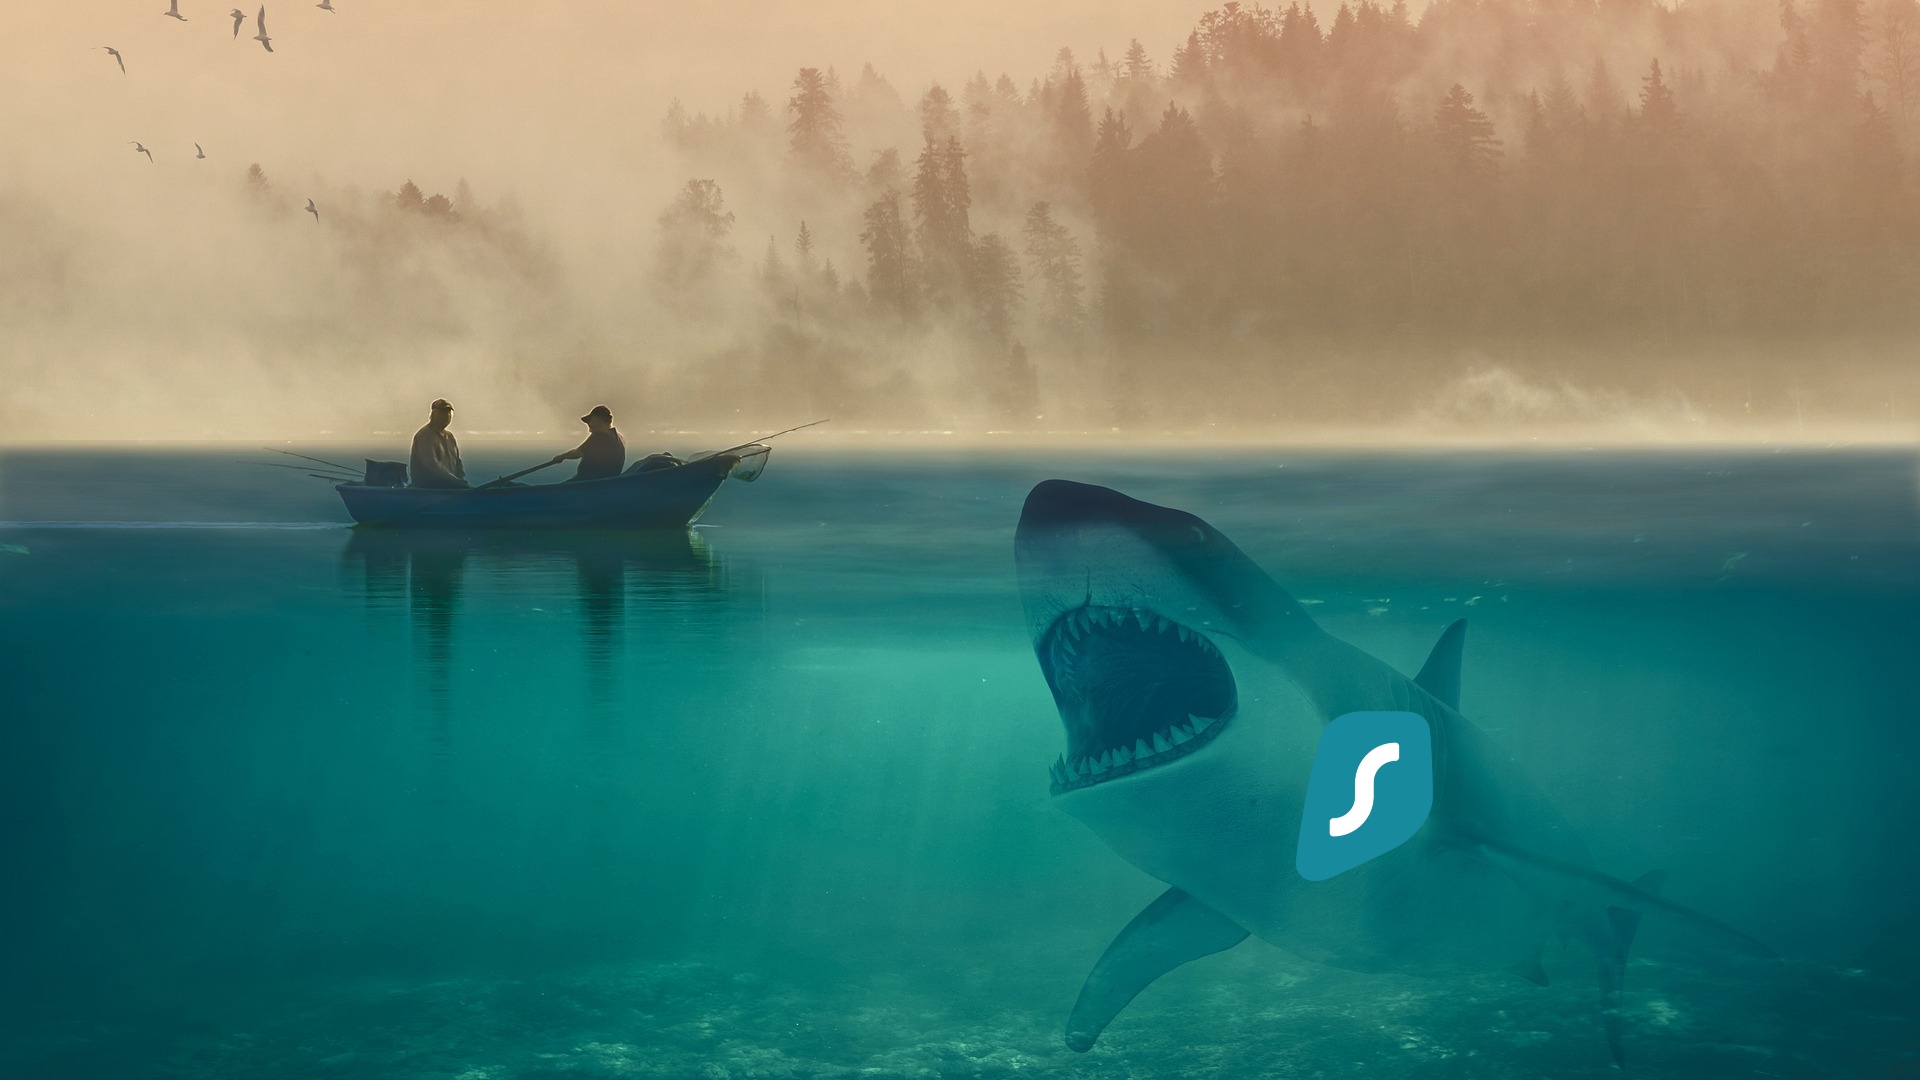 Surfshark VPN – everything you need to know